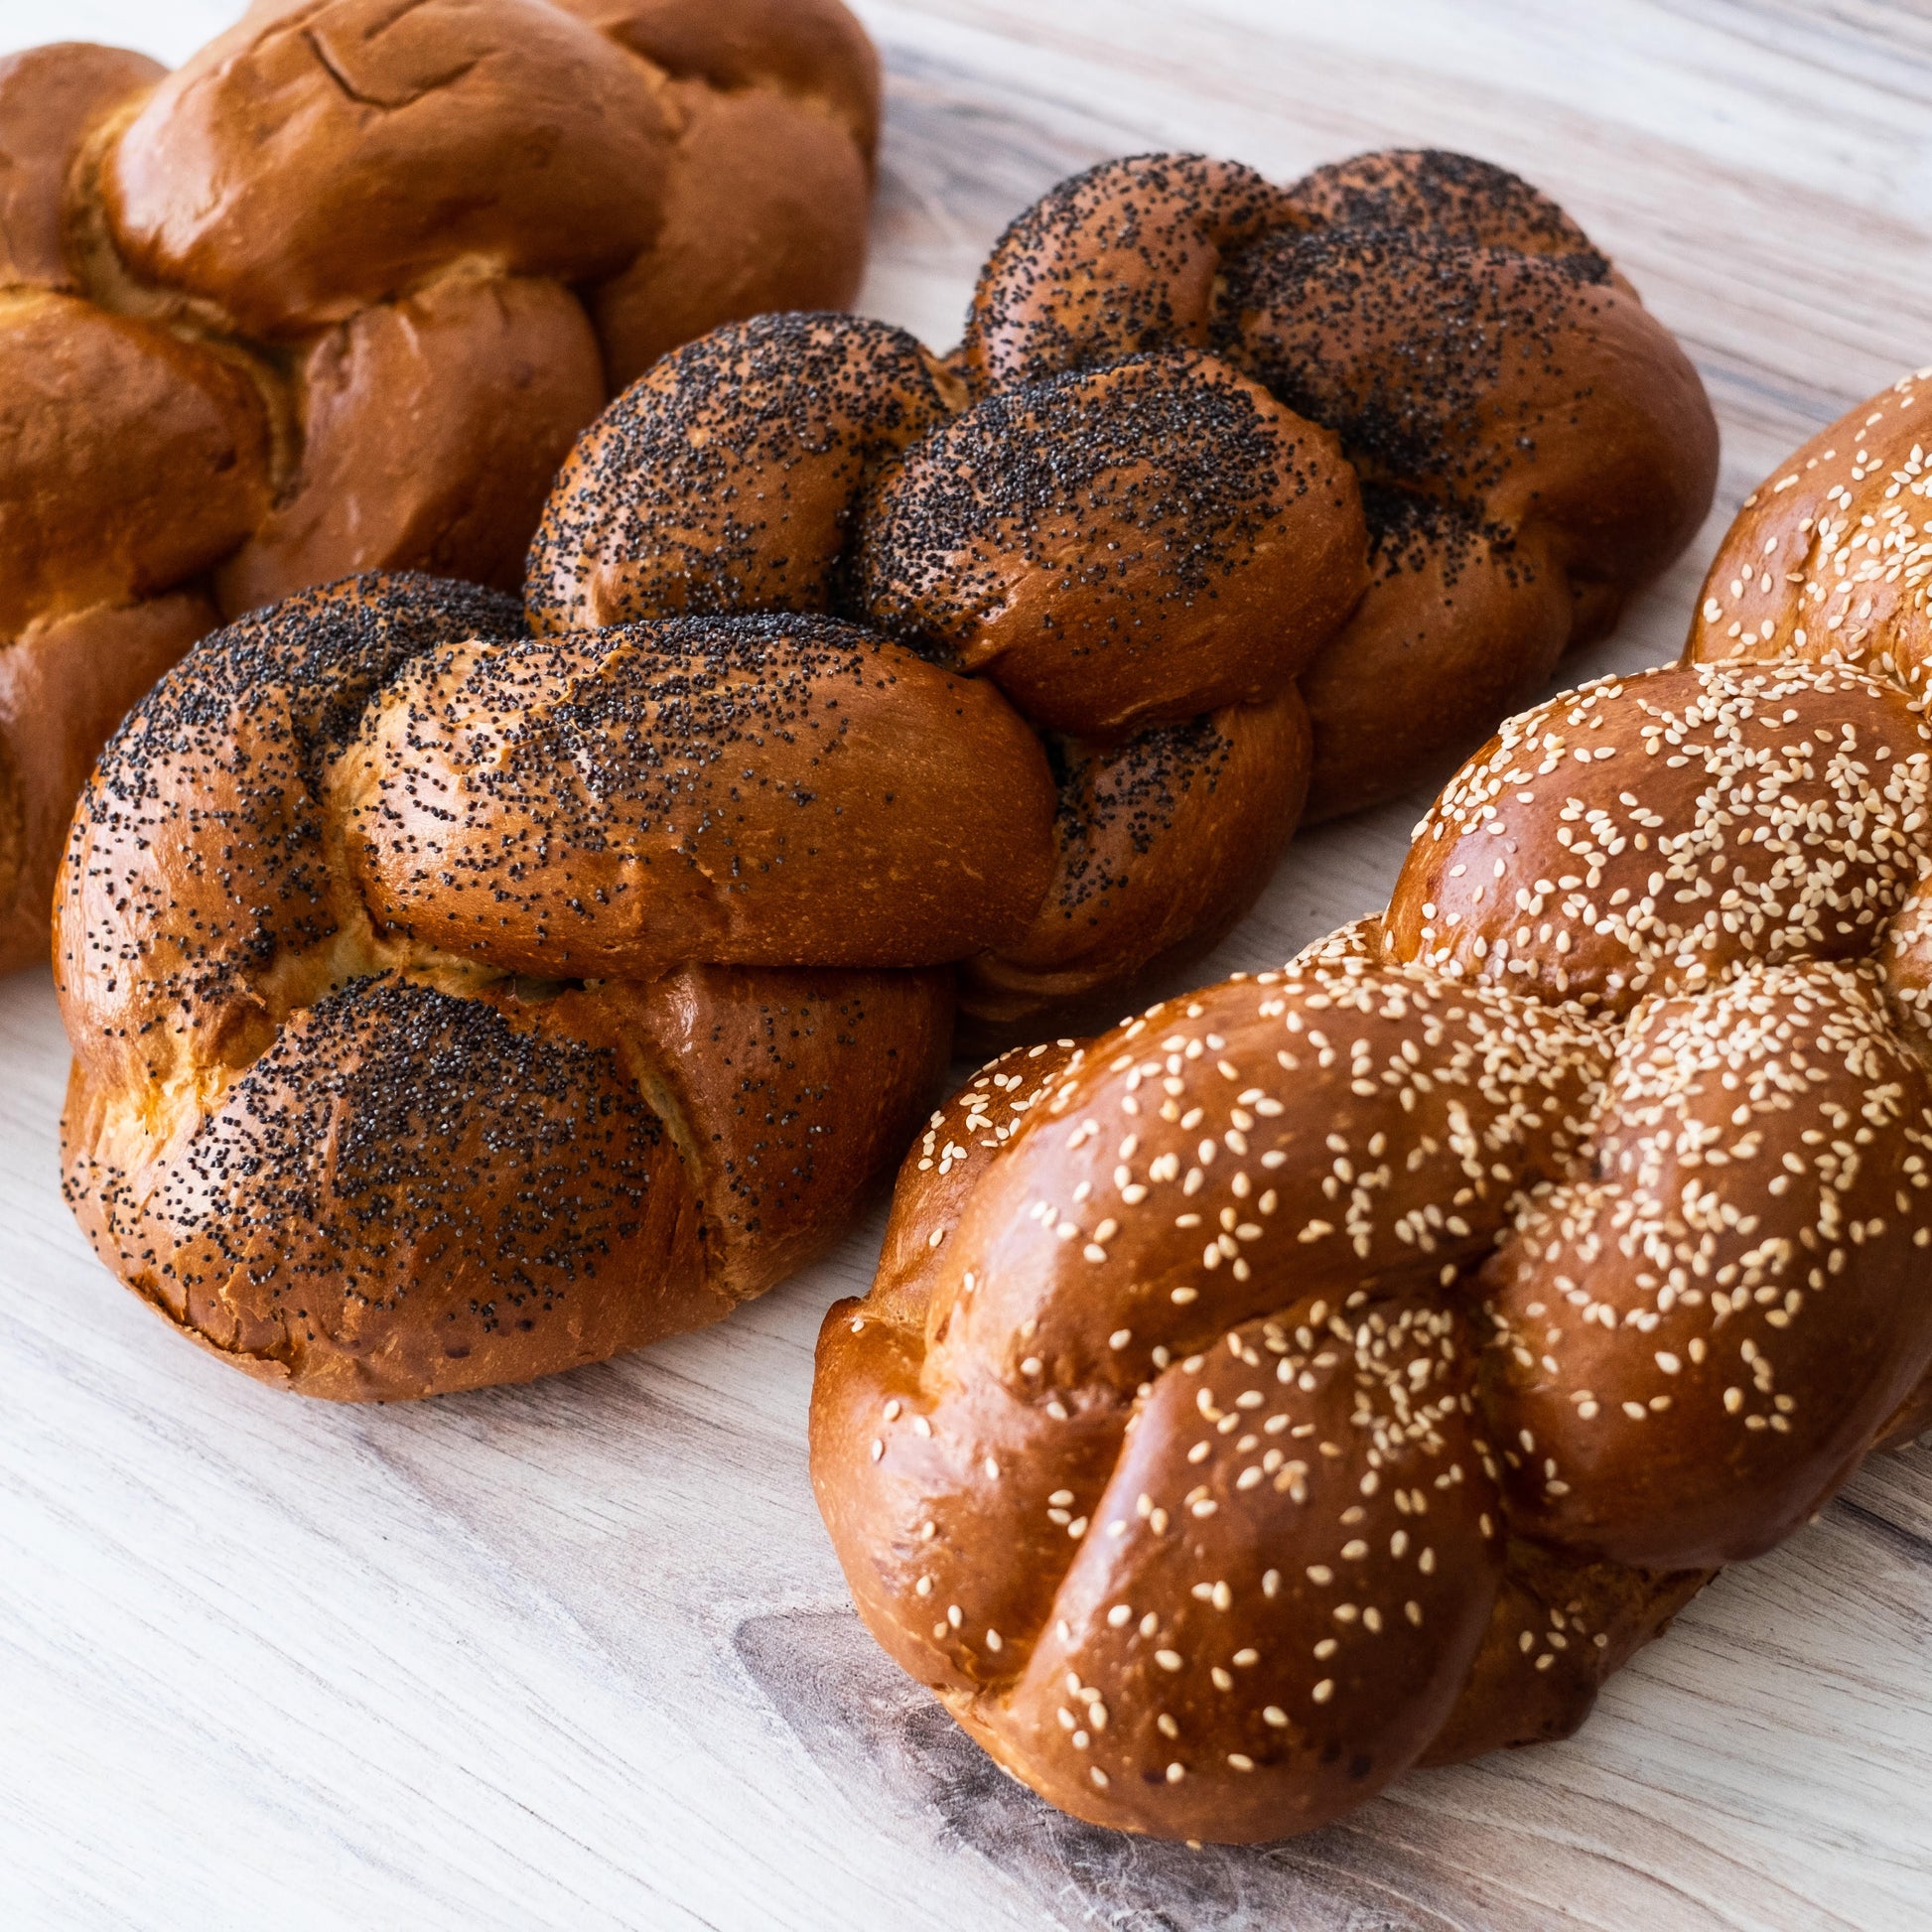 Our one pound challah come with sesame or poppy seeds or plain.  It will feed four to six people at the Sabbath dinner.